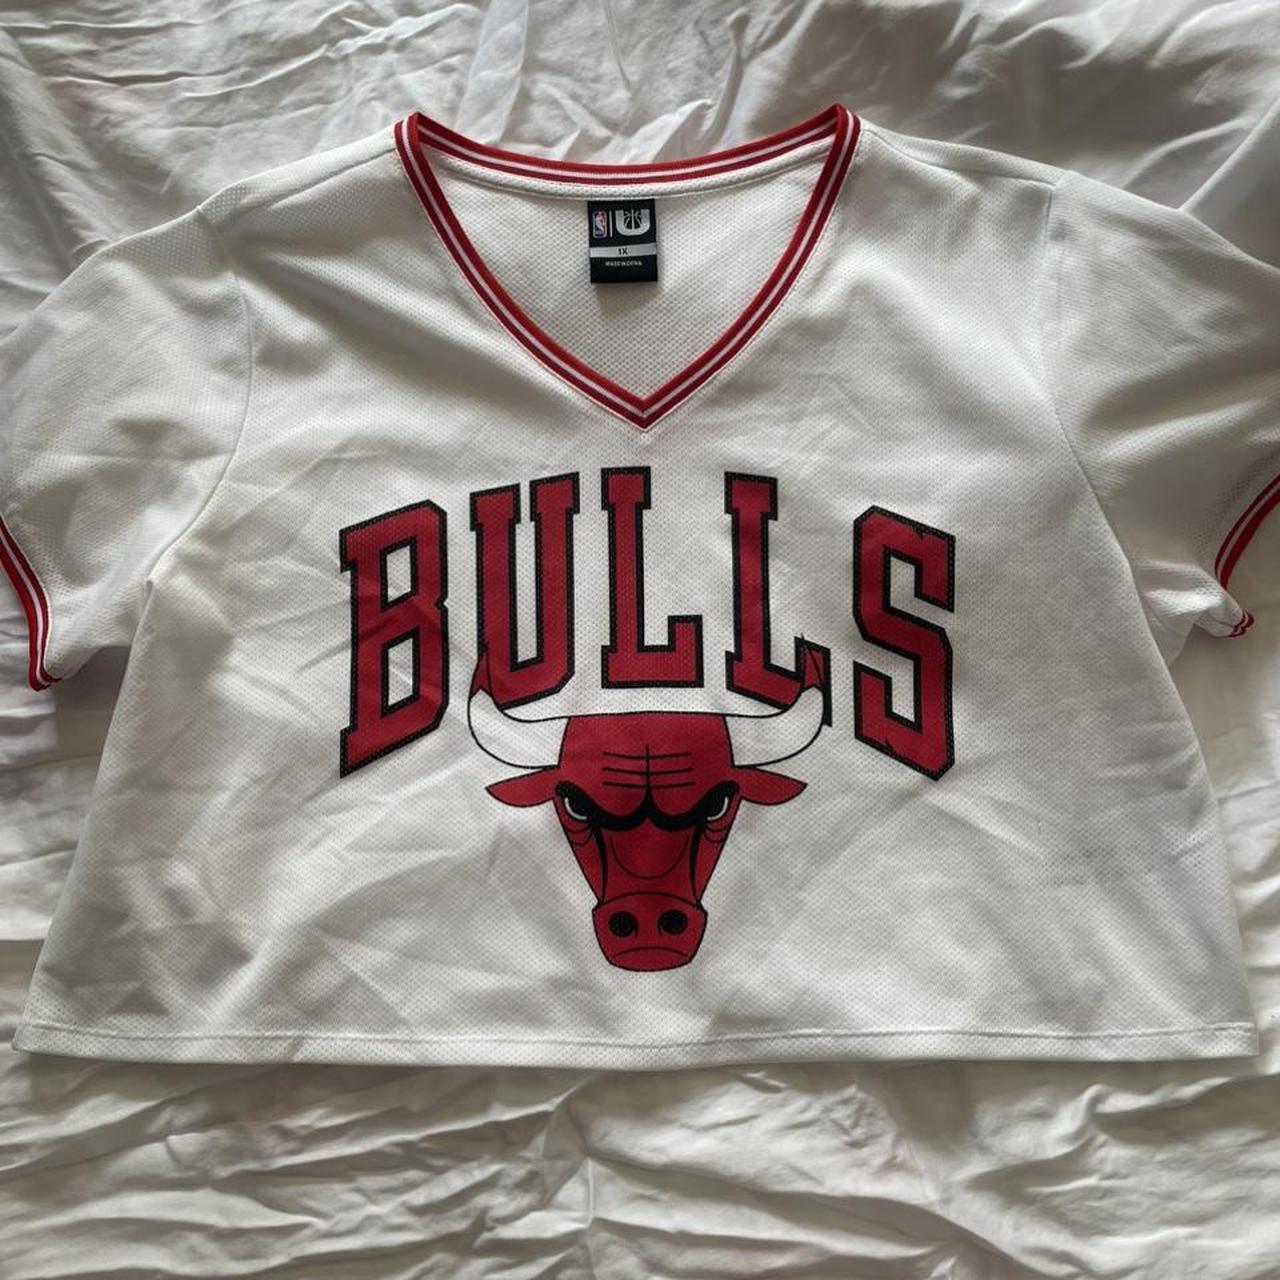 Chicago Bulls Jersey Tee Adult Small White - Depop